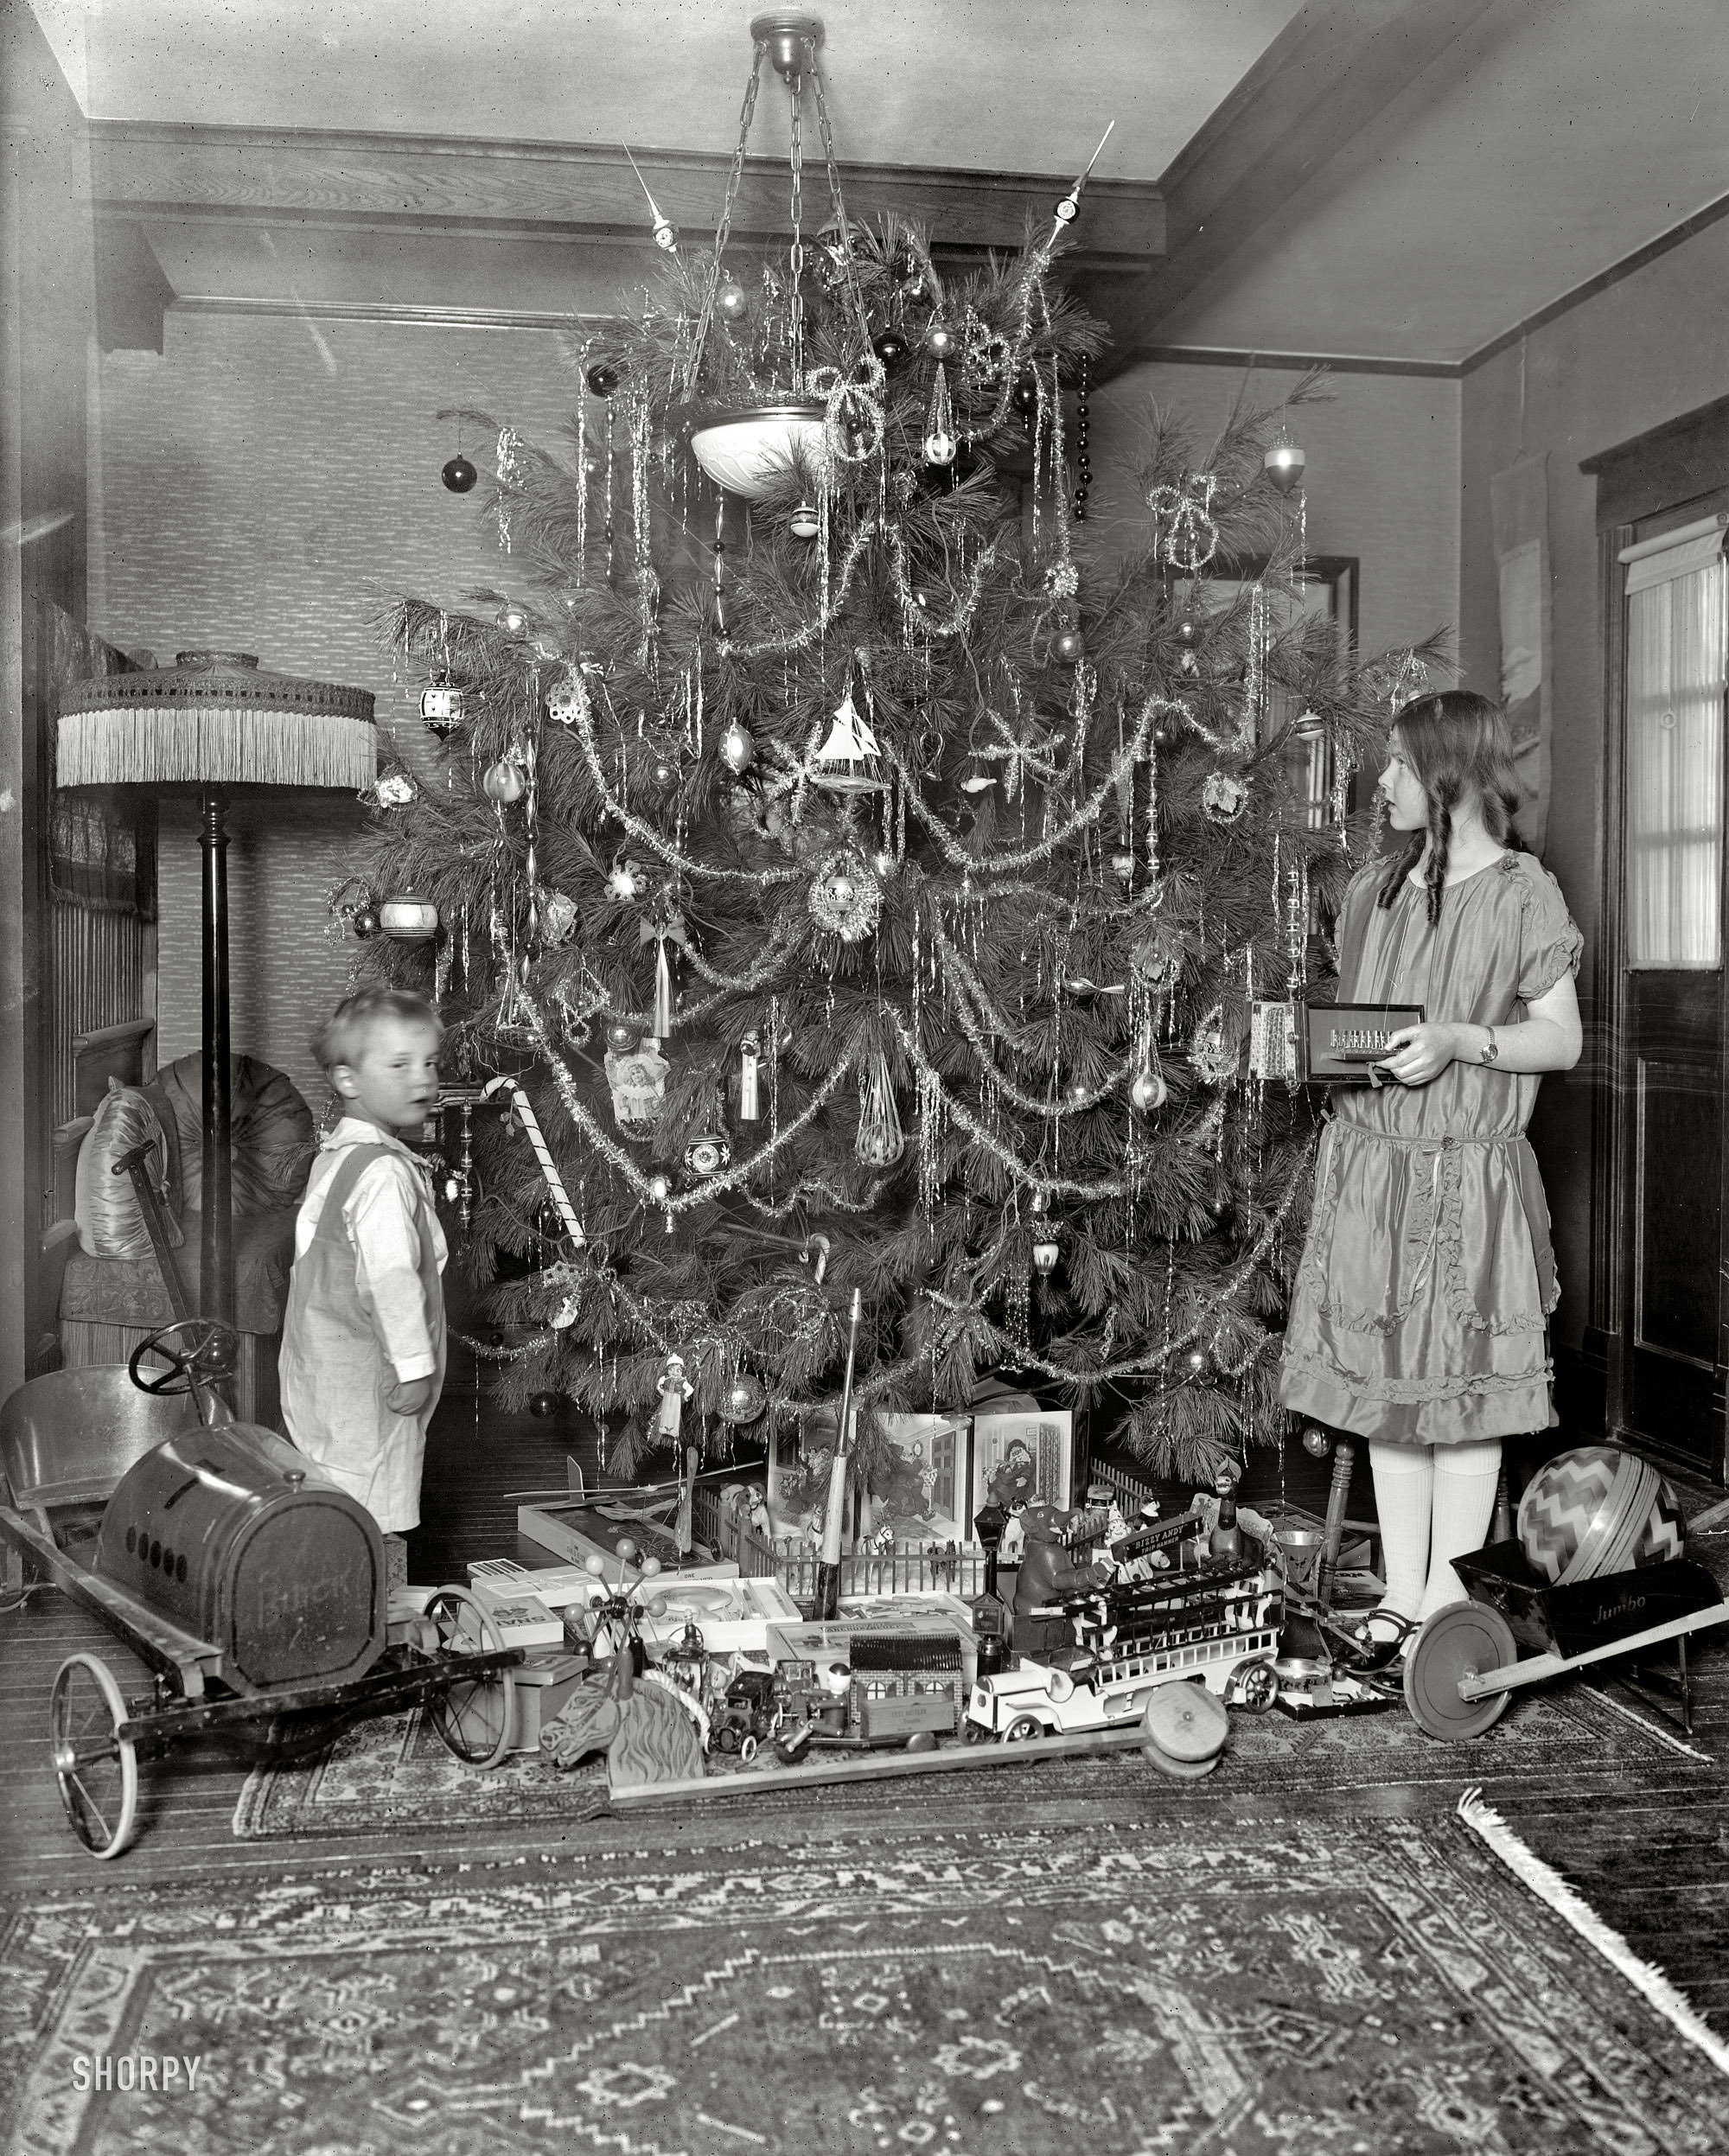 Opening gifts for Christmas in 1920.